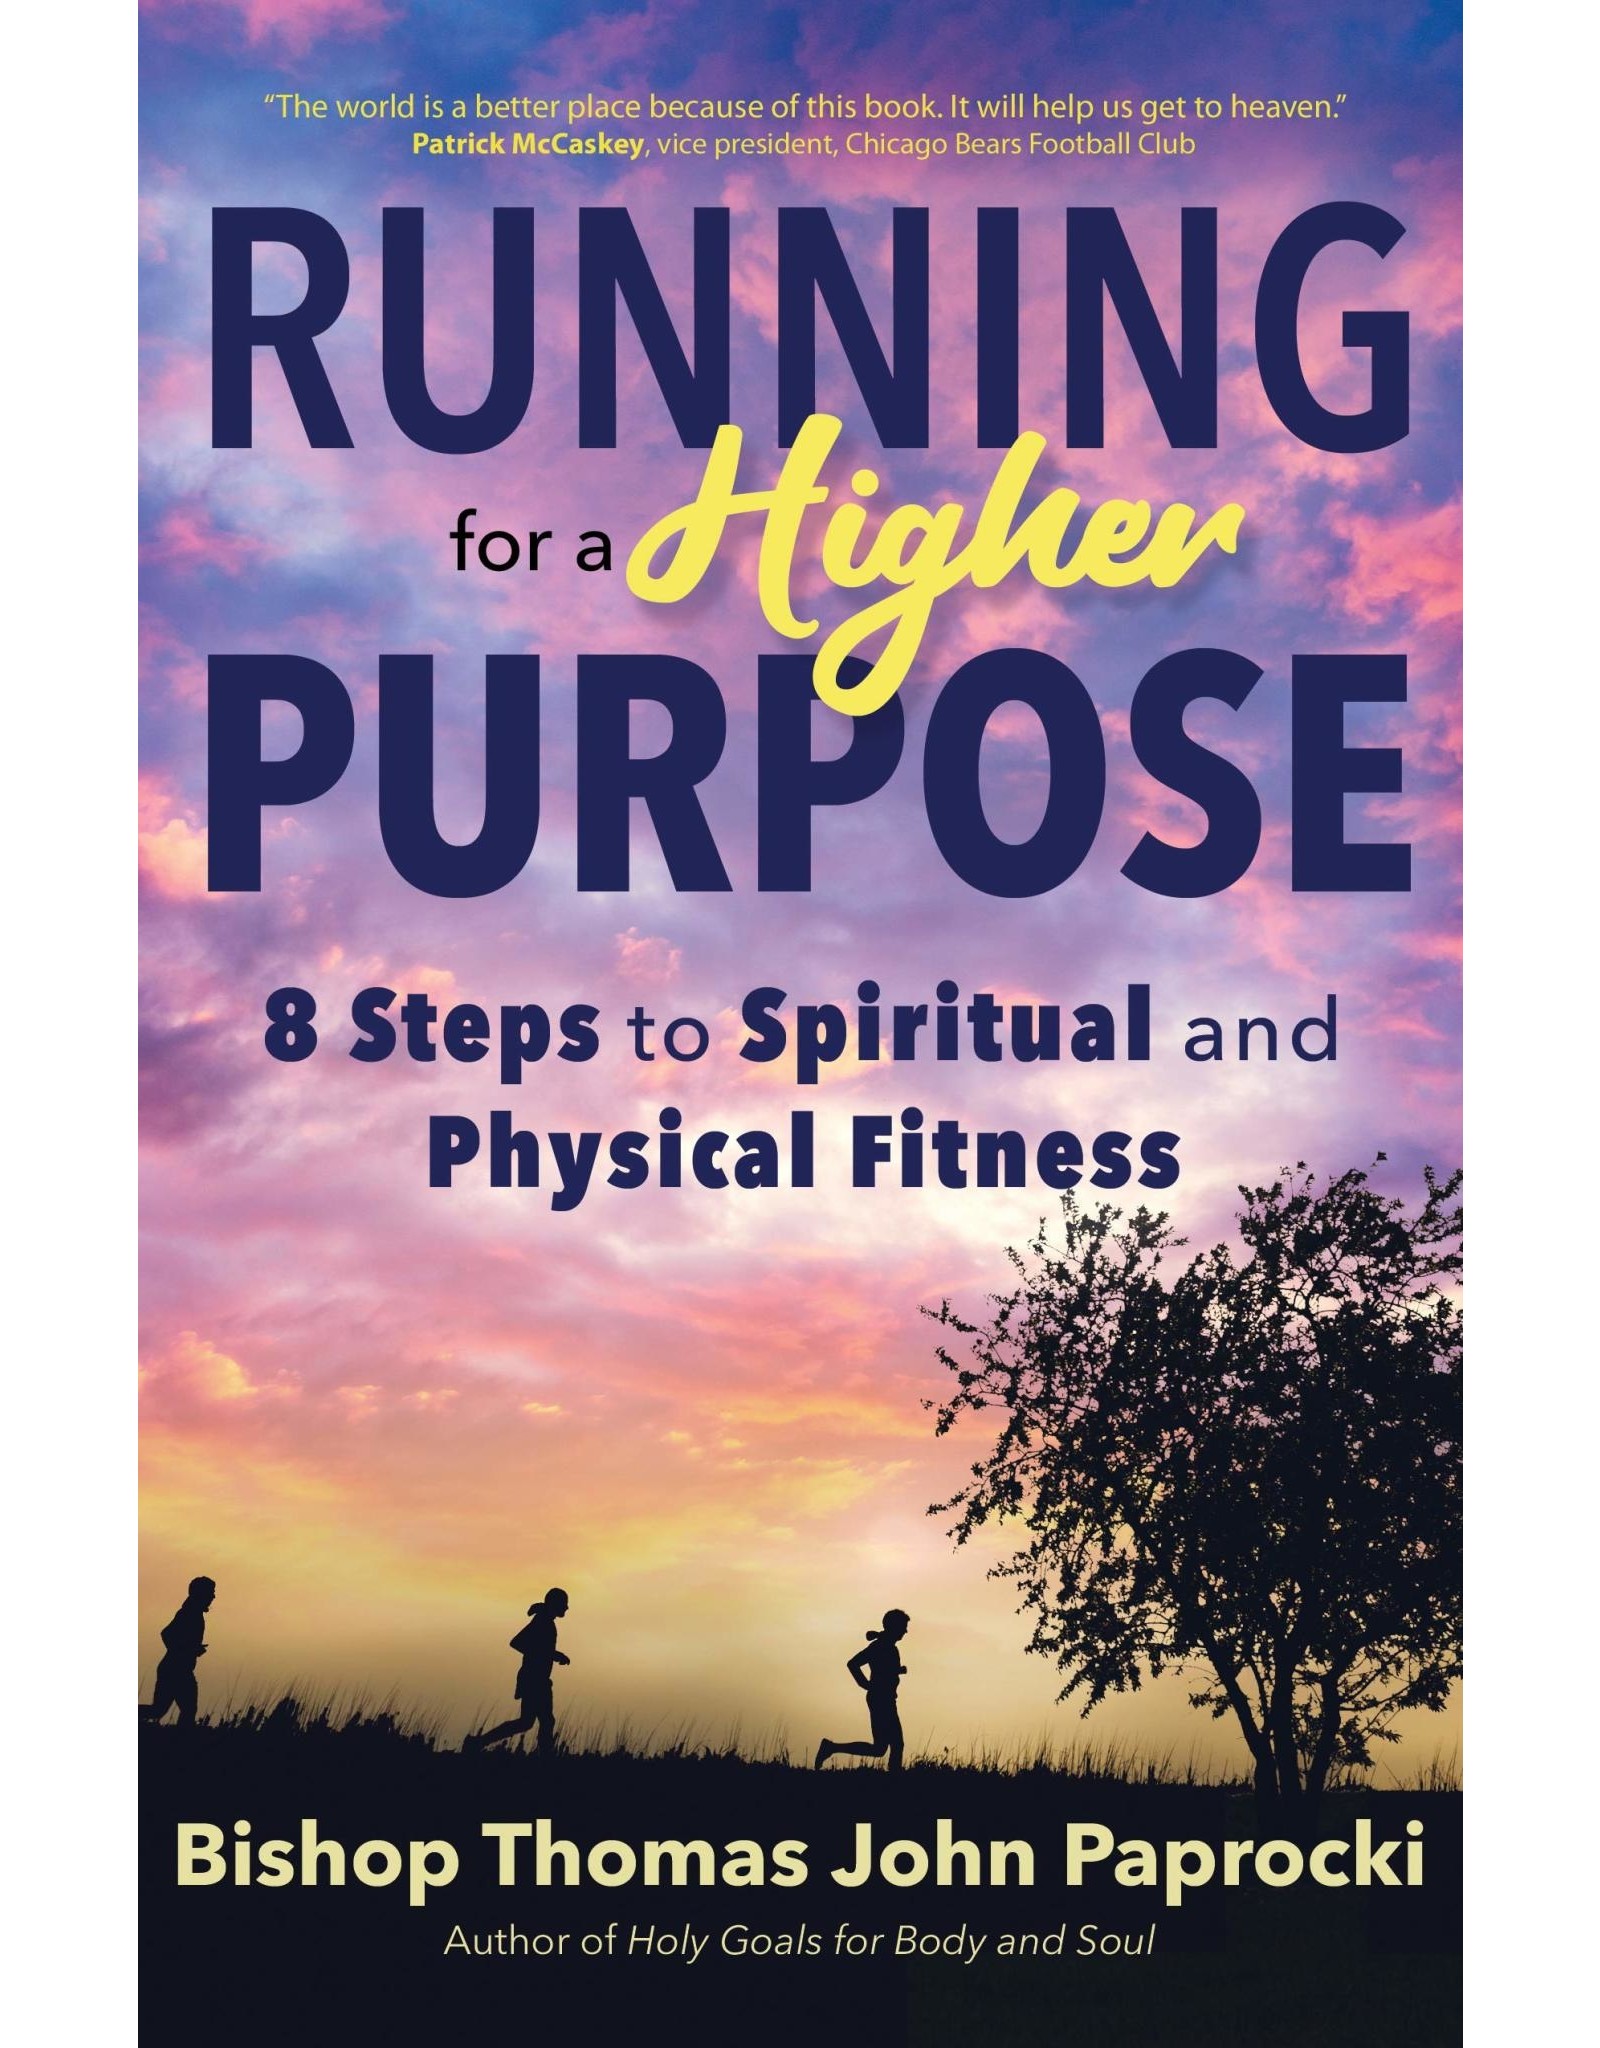 Ave Maria Running for a Higher Purpose: 8 Steps to Spiritual and Physical Fitness